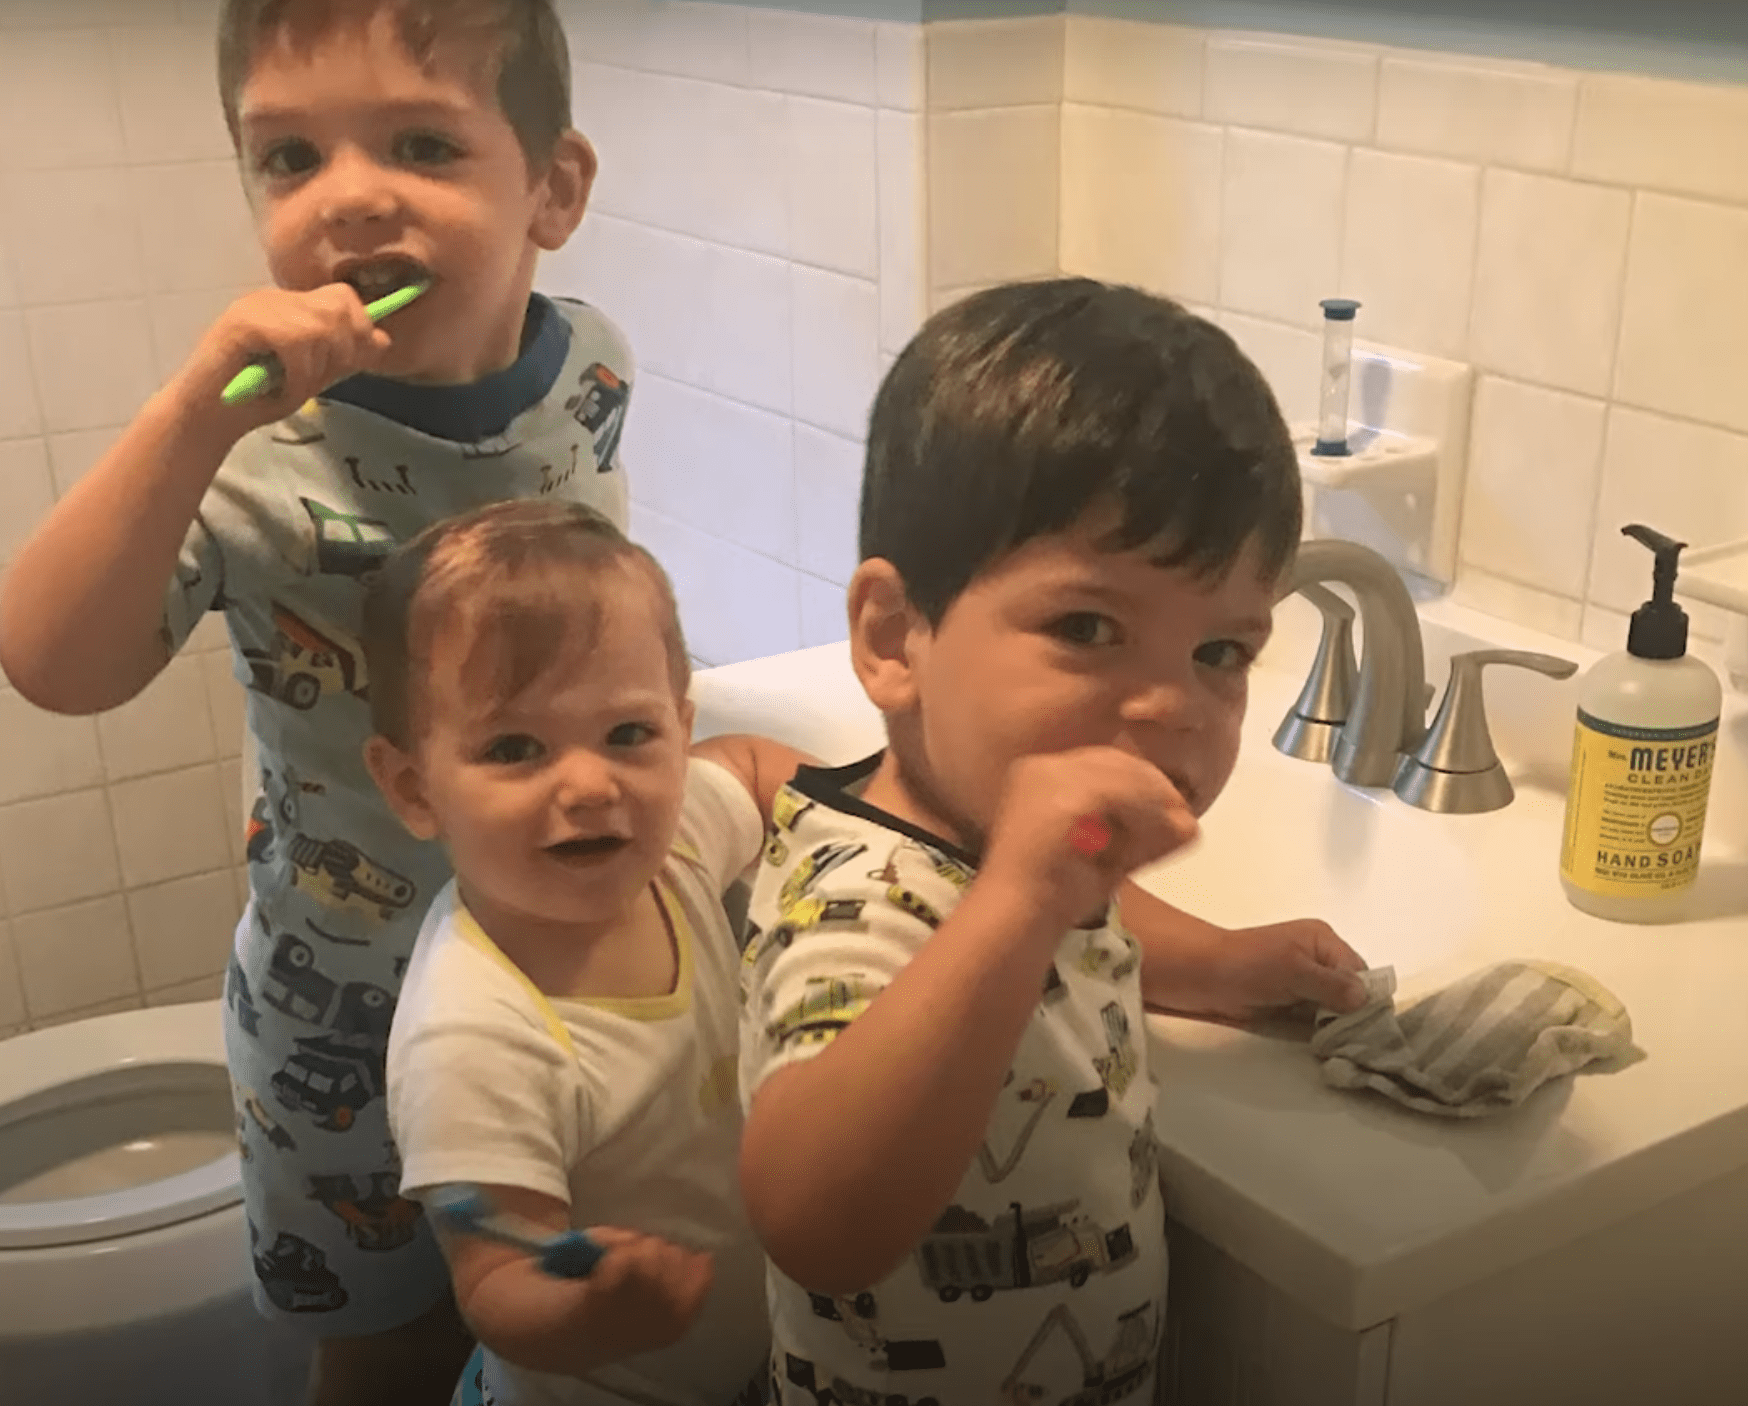 Three adopted brothers brush their teeth together. | Source: youtube.com/Good Morning America